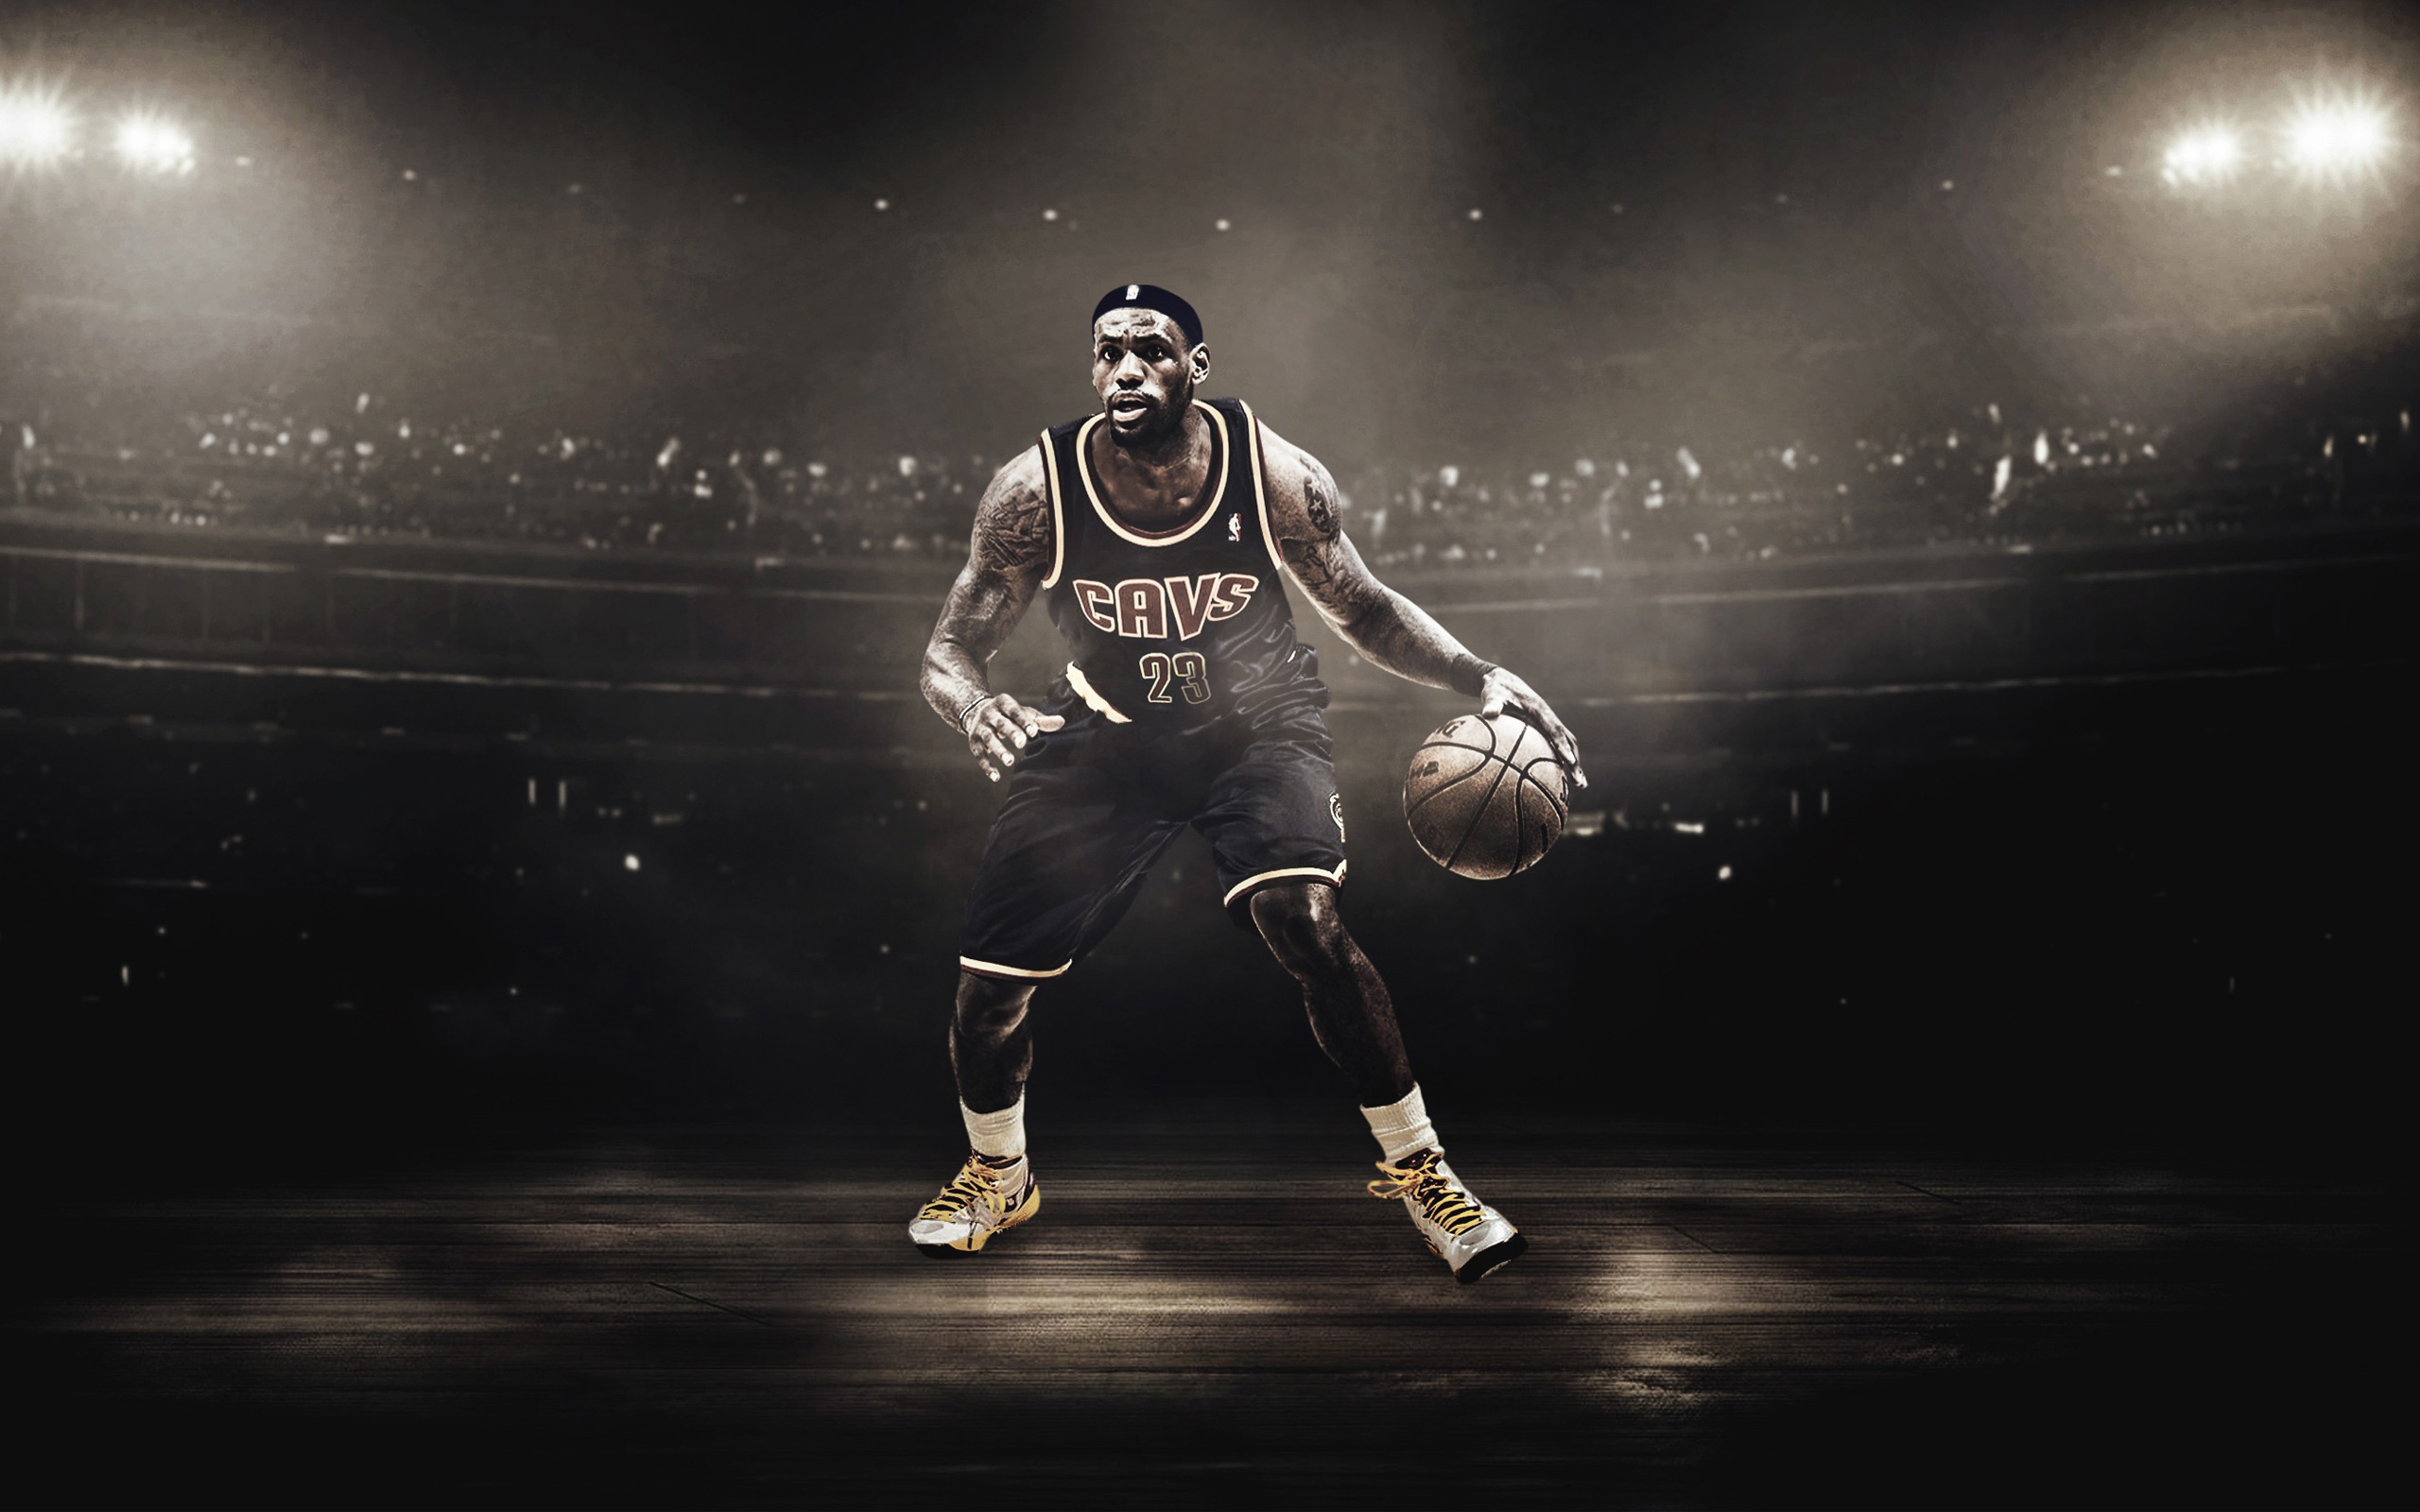 541159 1920x1080 lebron james images background JPG 283 kB  Rare Gallery  HD Wallpapers